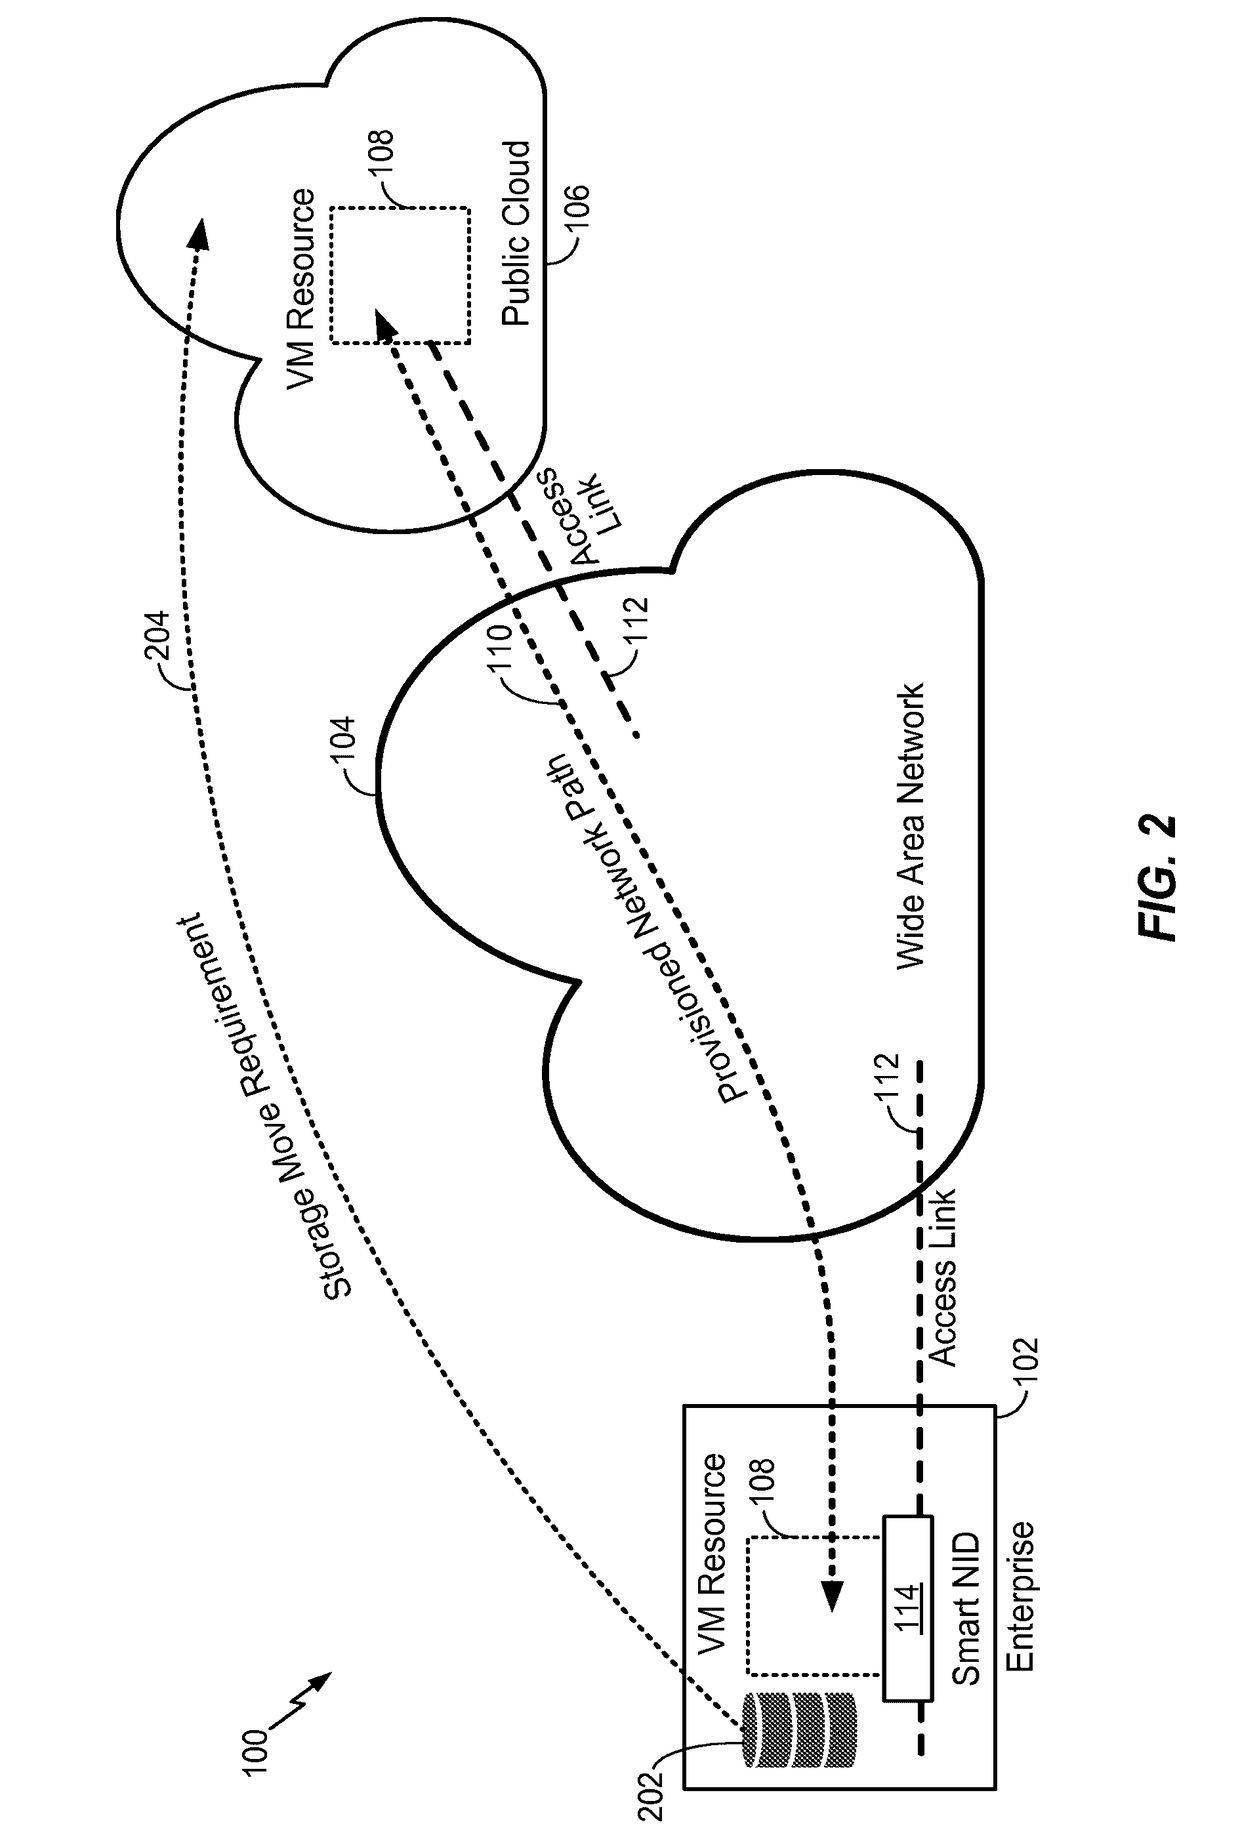 Method and apparatus for provisioning virtual network functions from a network service provider